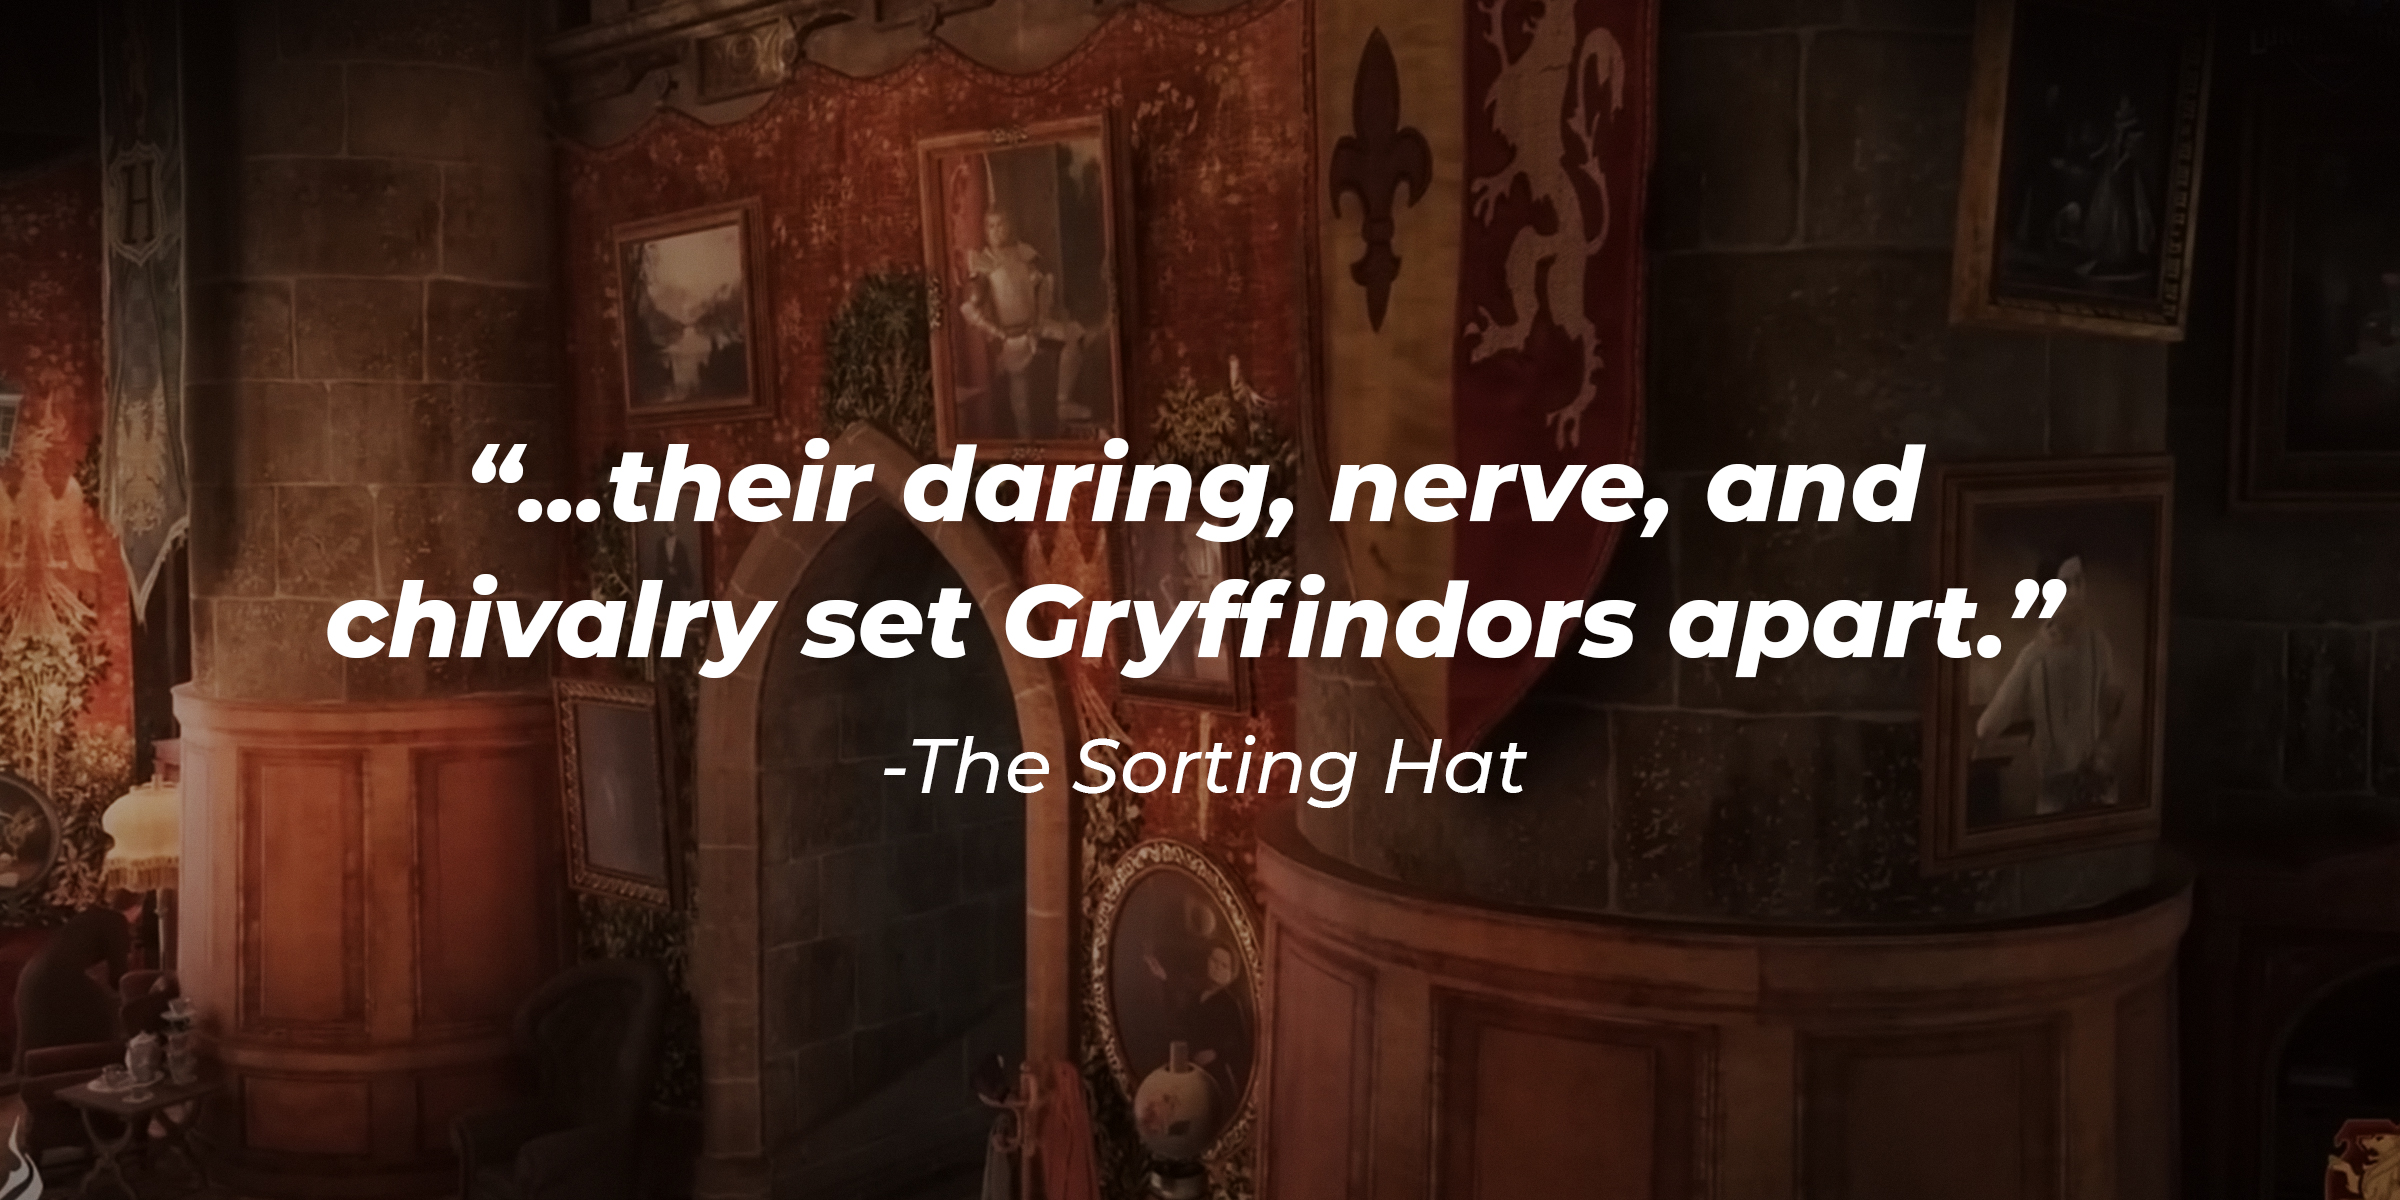 Photo of Gryffindor common room with the quote: "...their daring, nerve, and chivalry set Gryffindors apart." | Source: Youtube.com/HogwartsLegacy